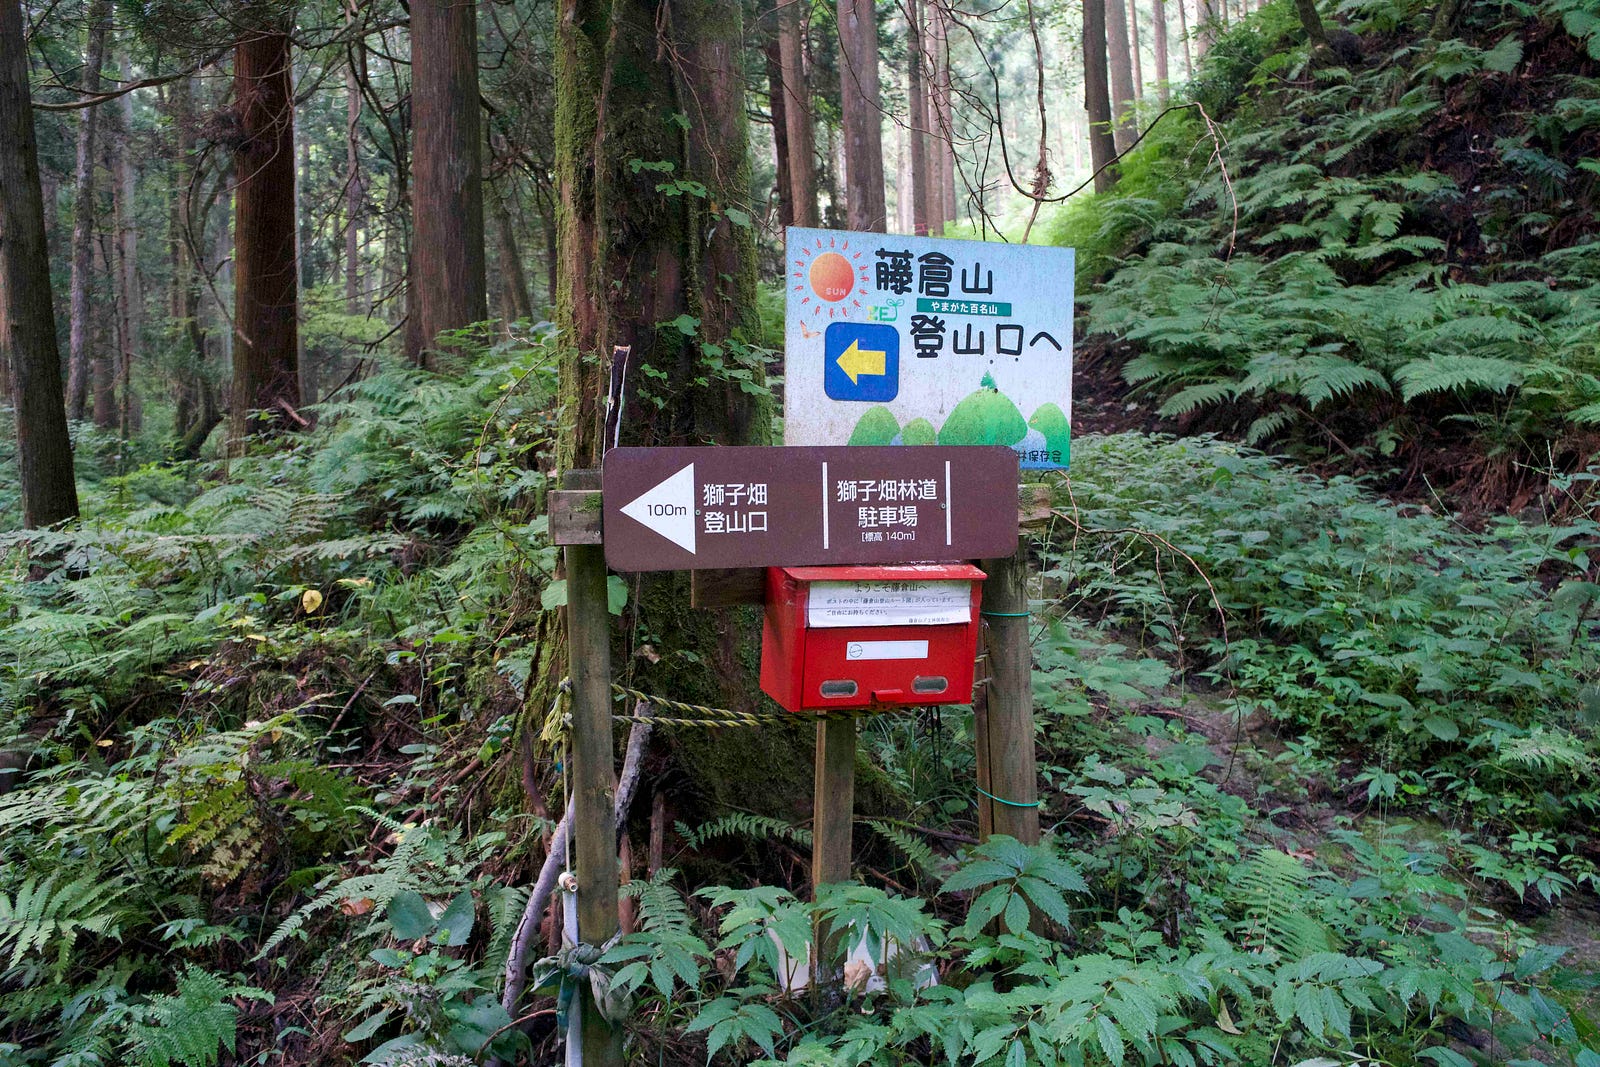 Signage in the middle of a dense cedar forest on the way up Mt. Fujikura. There is even a red letterbox for keeping maps and notes to other hikers